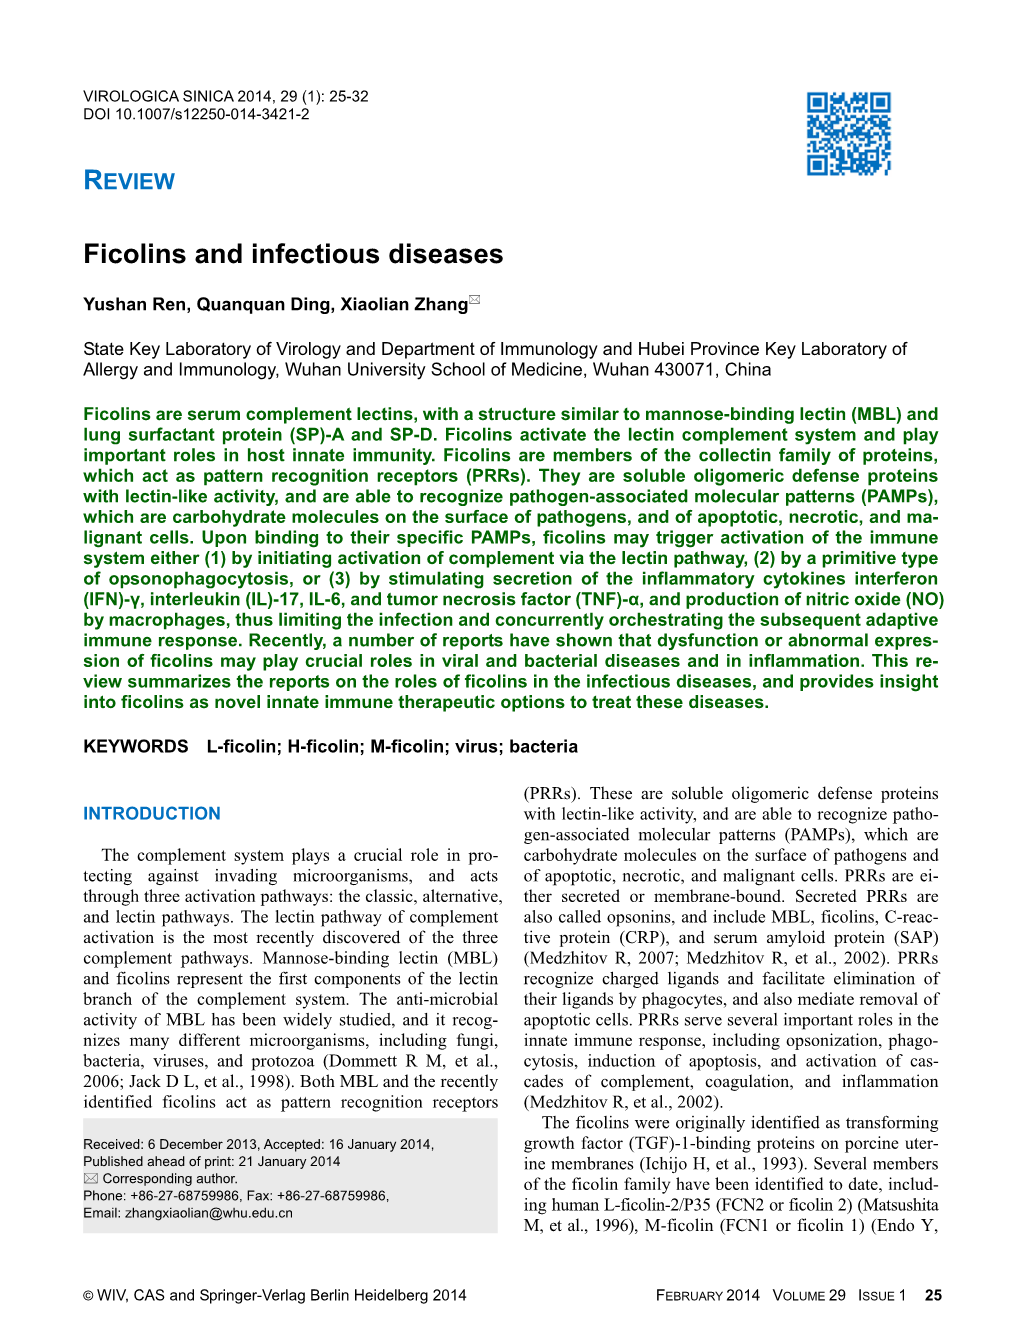 Ficolins and Infectious Diseases